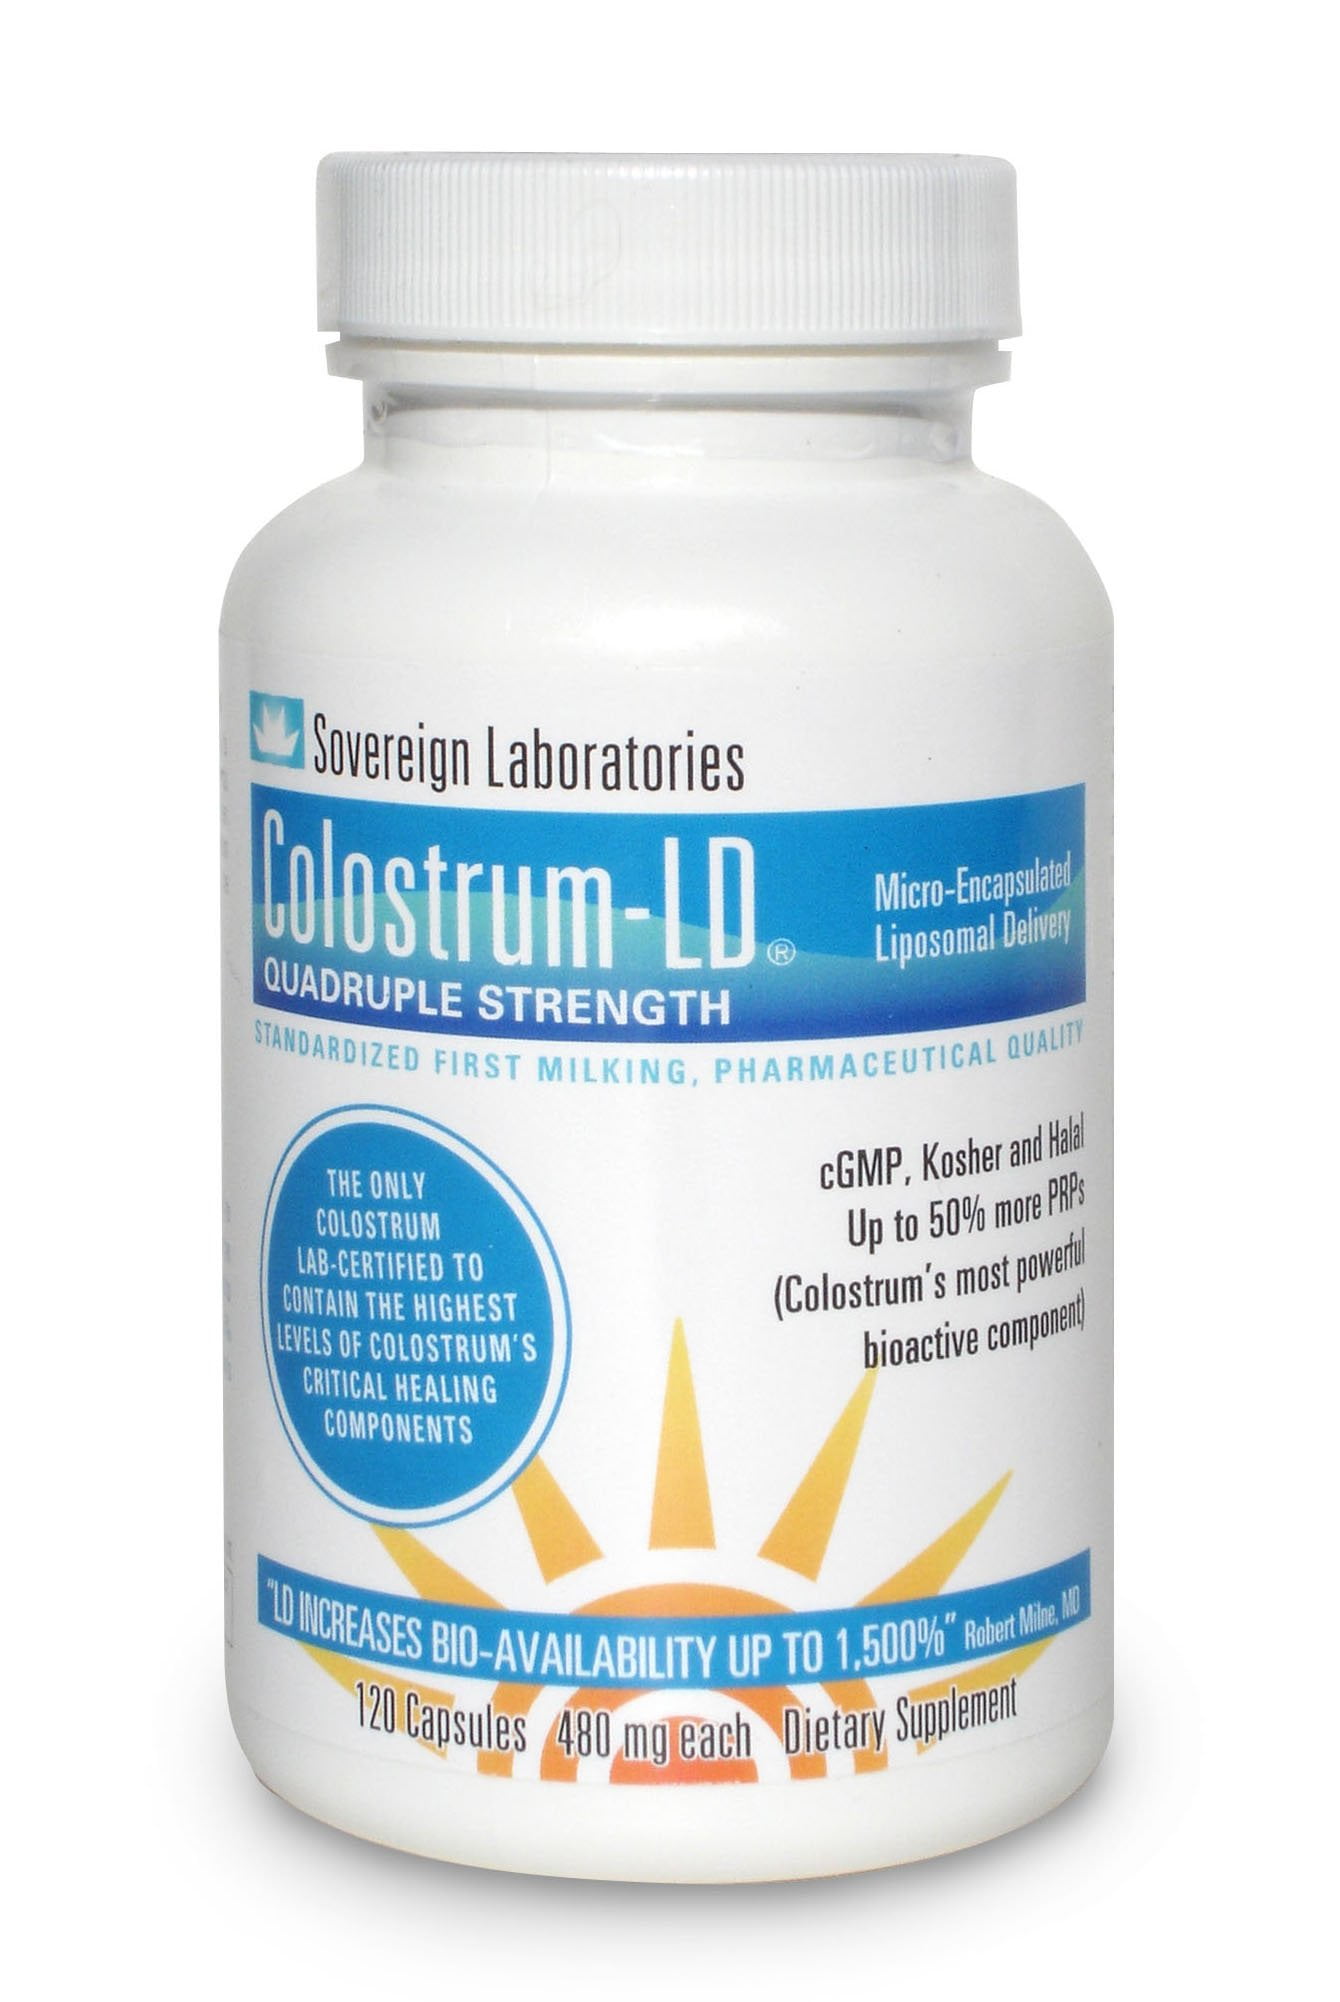 Colostrum-LD 480 mg Capsules with Proprietary Liposomal Delivery (LD